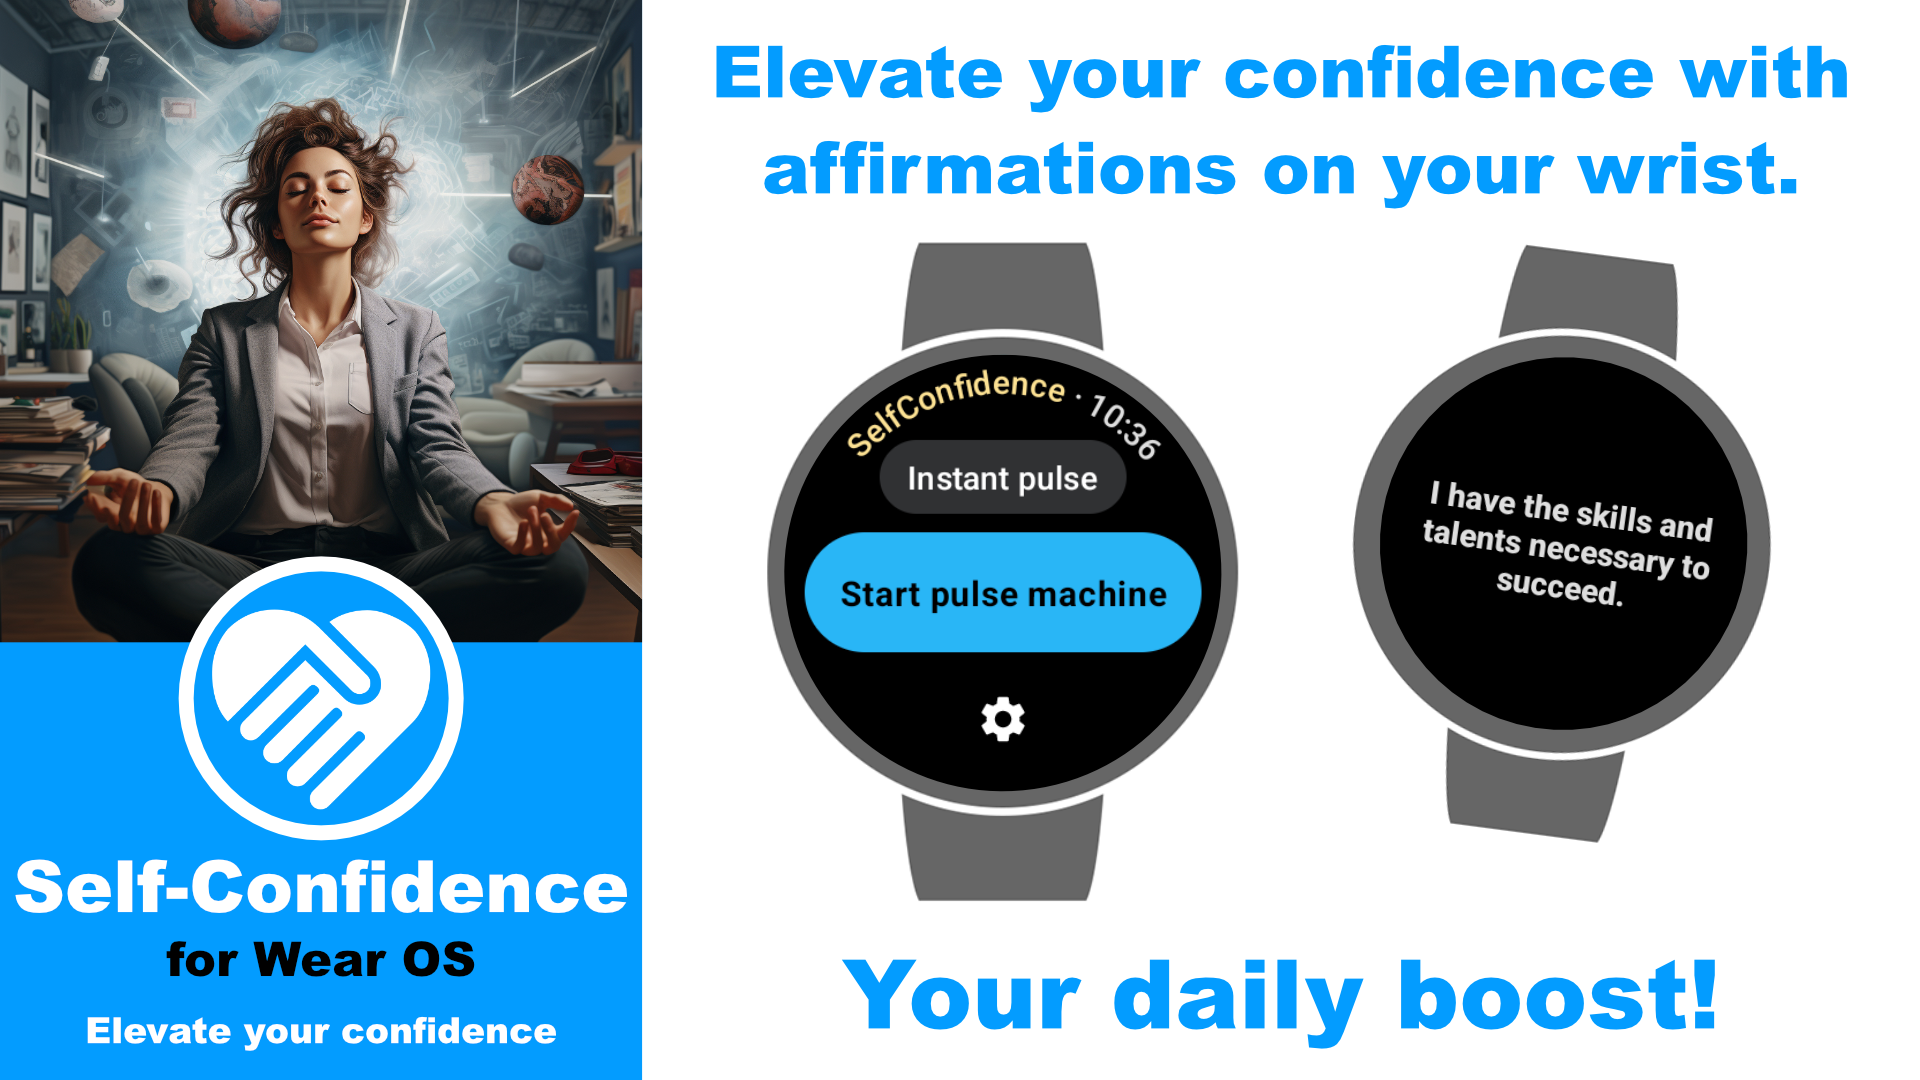 Self Confidence for Wear OS